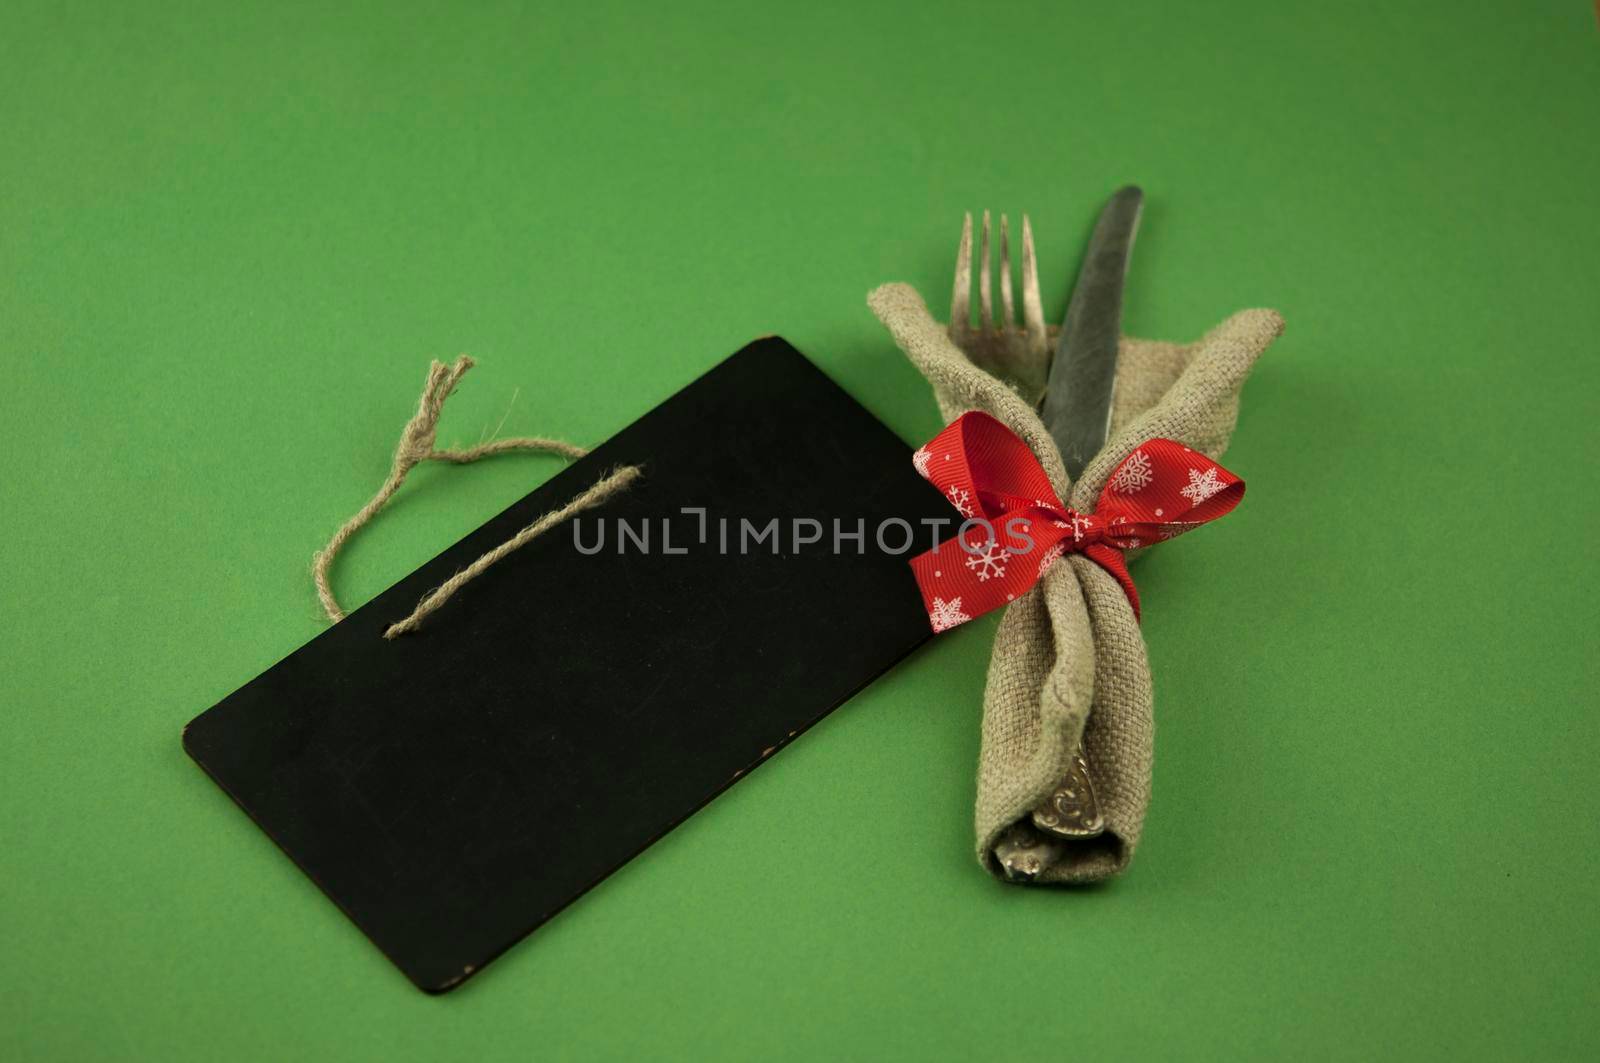 Vintage silverware decorated with red ribbon. Christmas menu. Copy space.